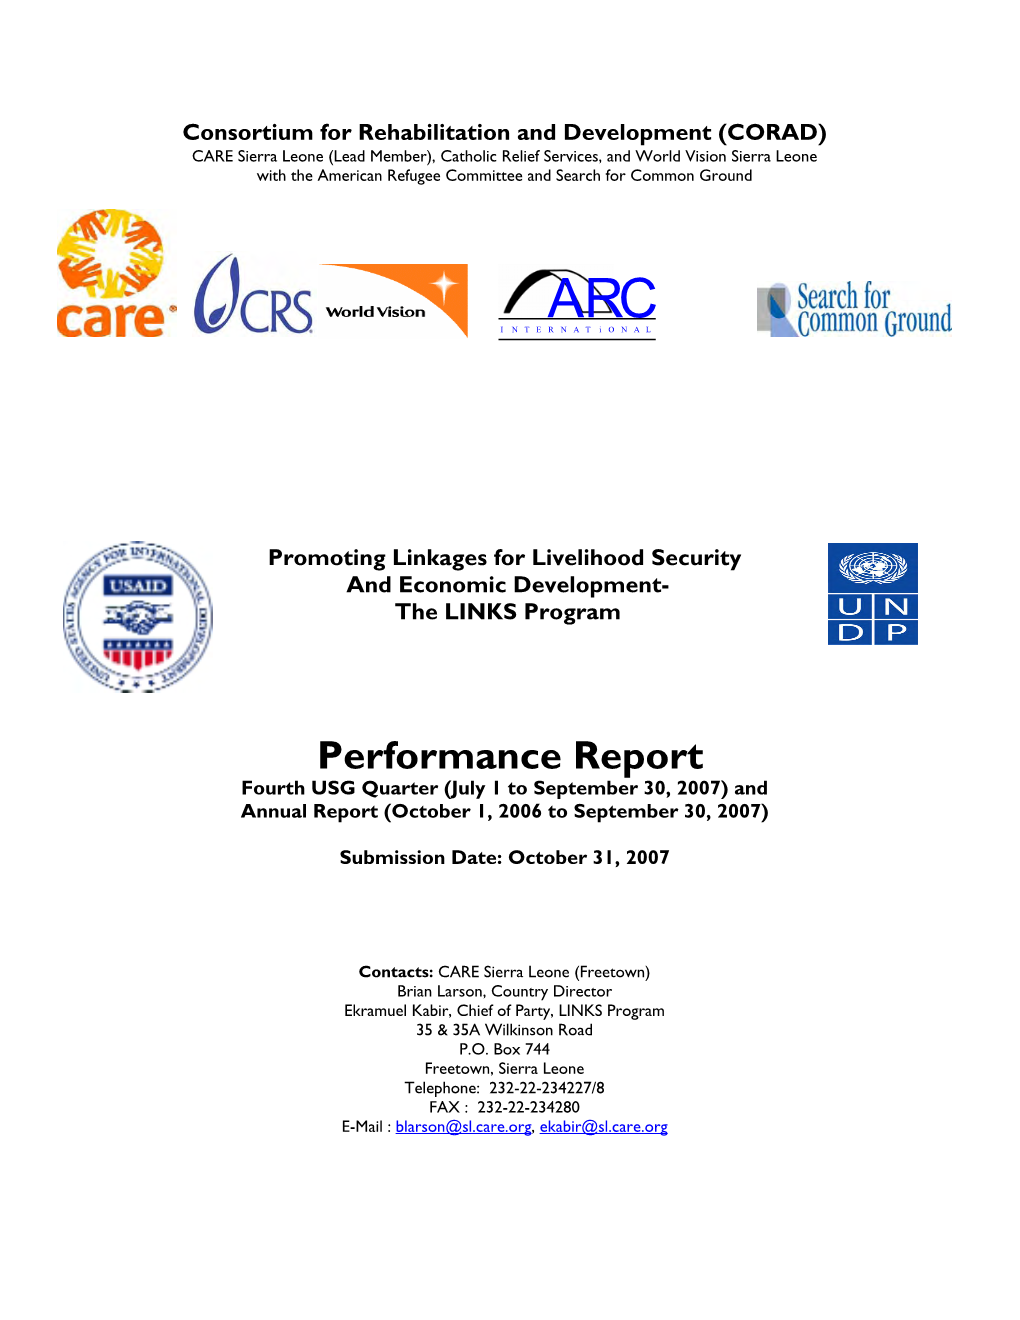 Performance Report Fourth USG Quarter (July 1 to September 30, 2007) and Annual Report (October 1, 2006 to September 30, 2007)